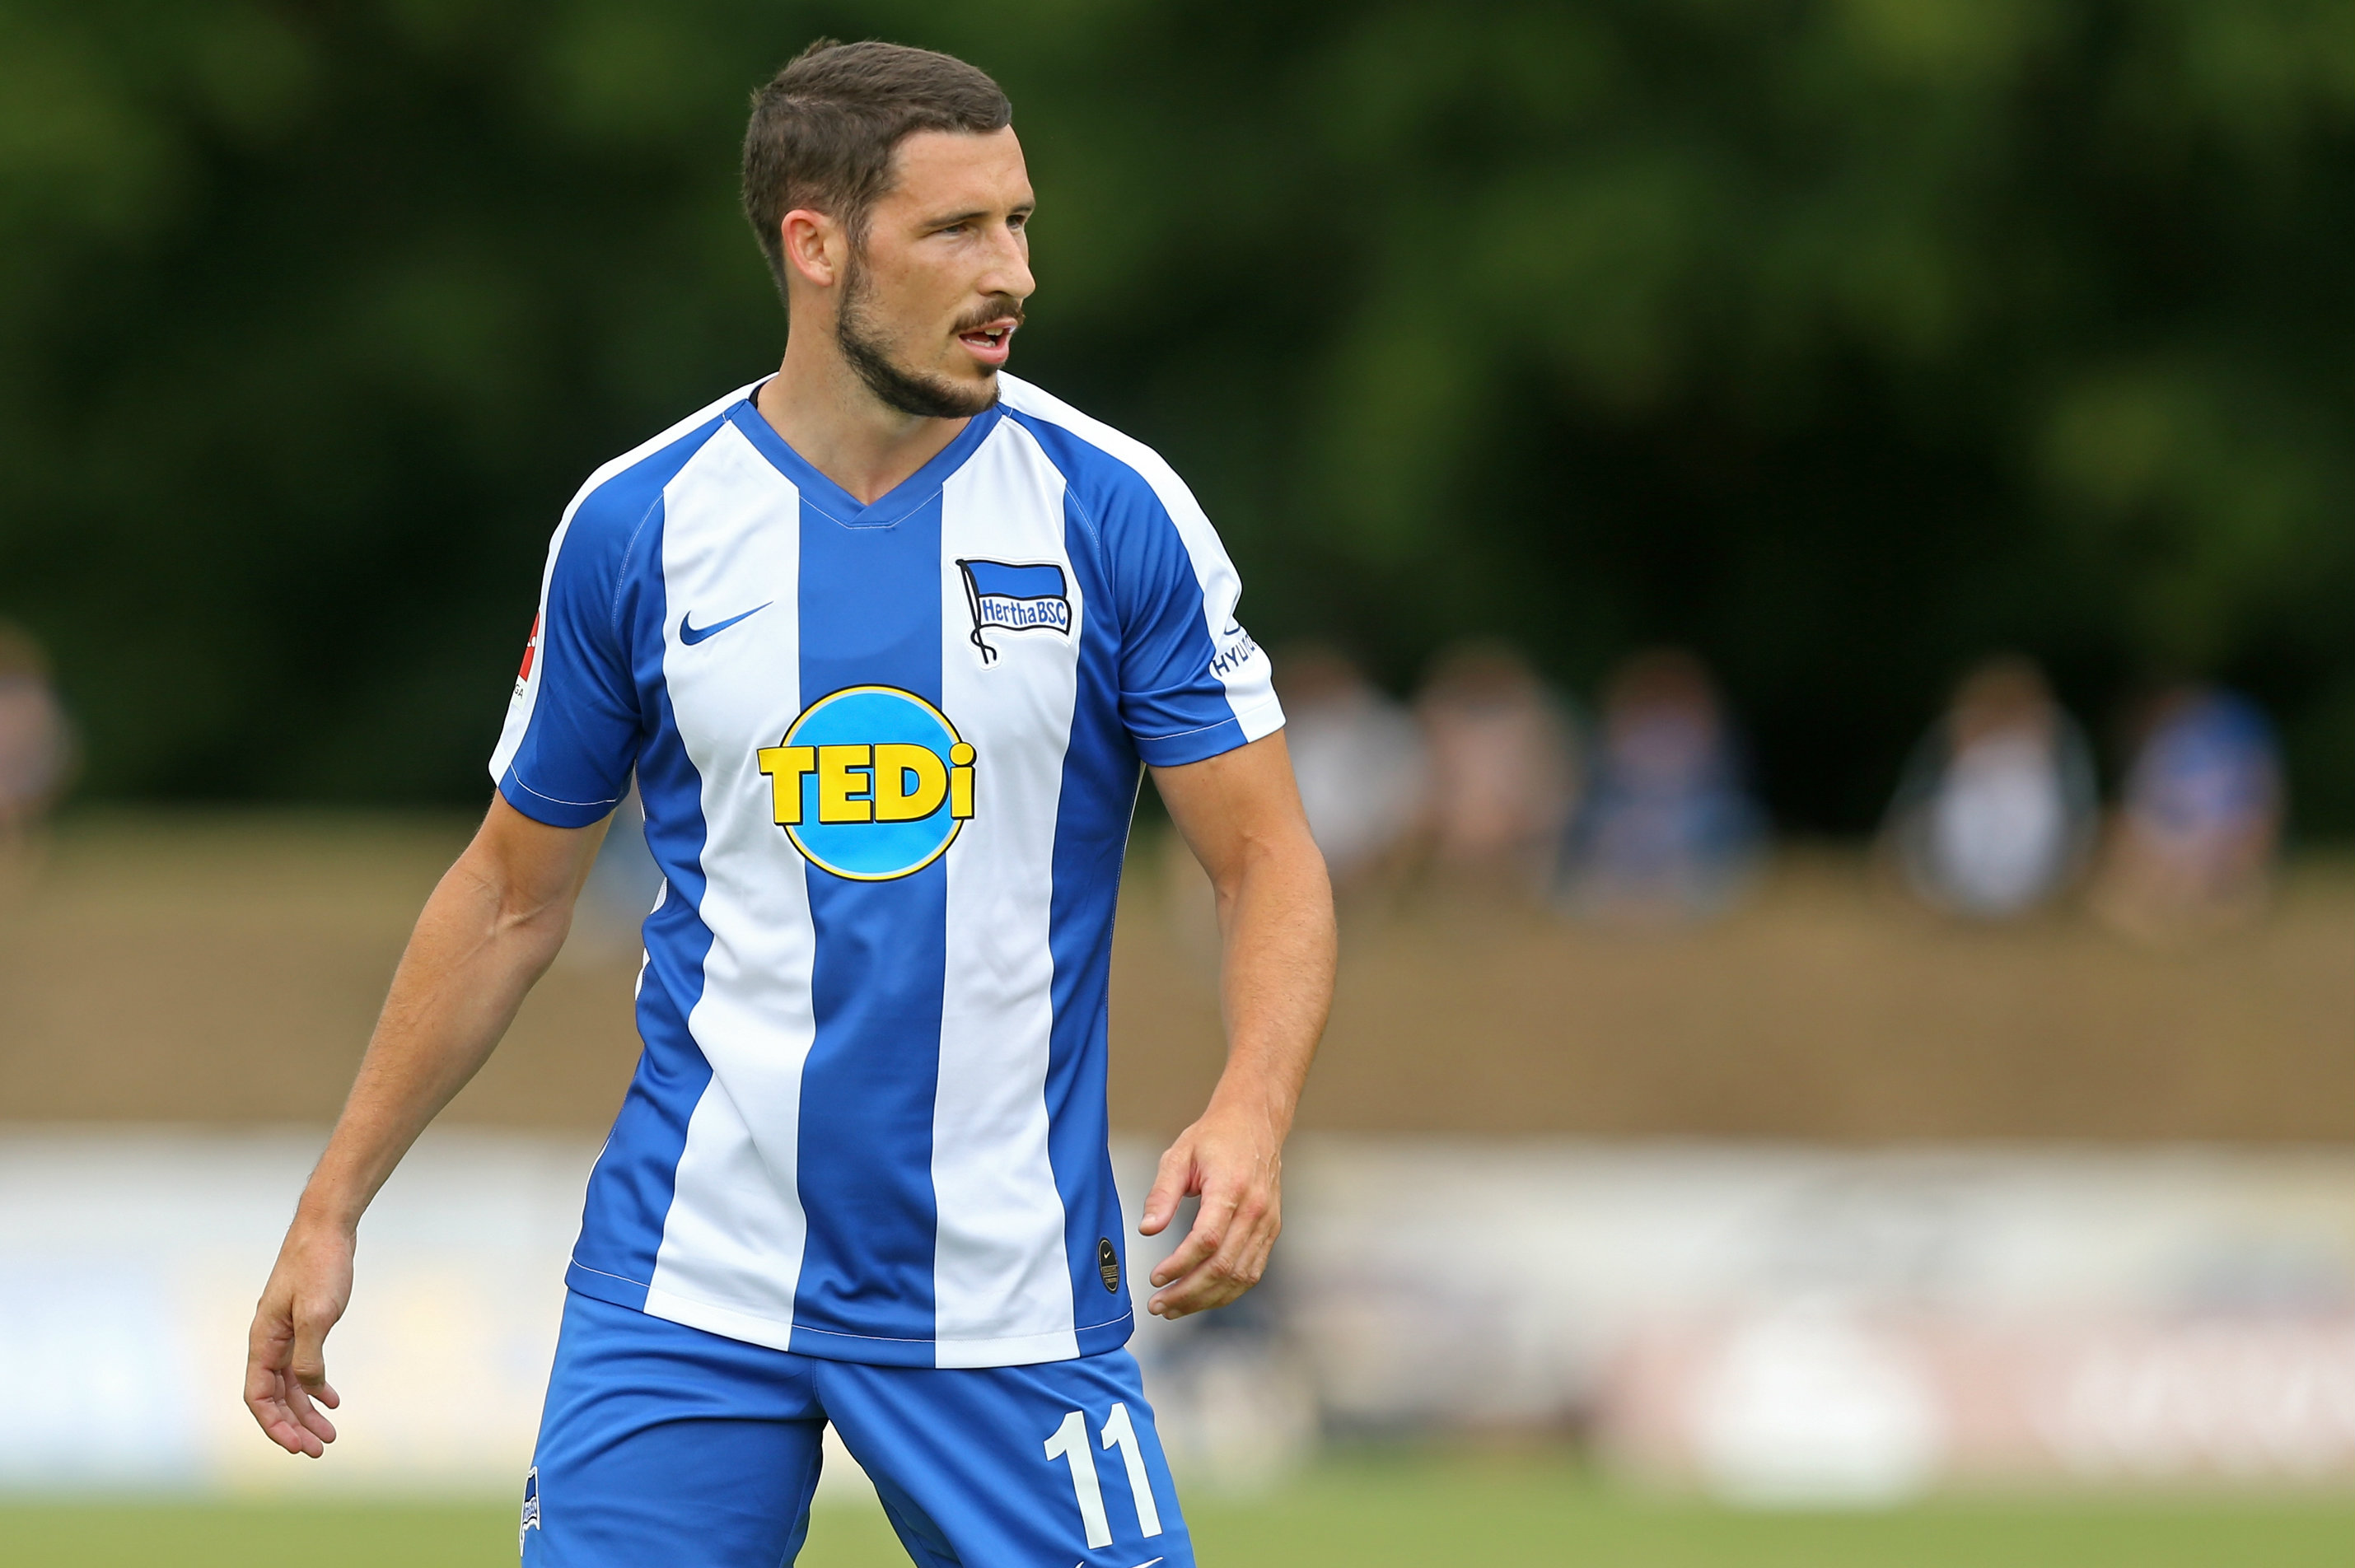 Mathew Leckie's Hertha Berlin will be expected to progress in the Cup against fourth tier opposition